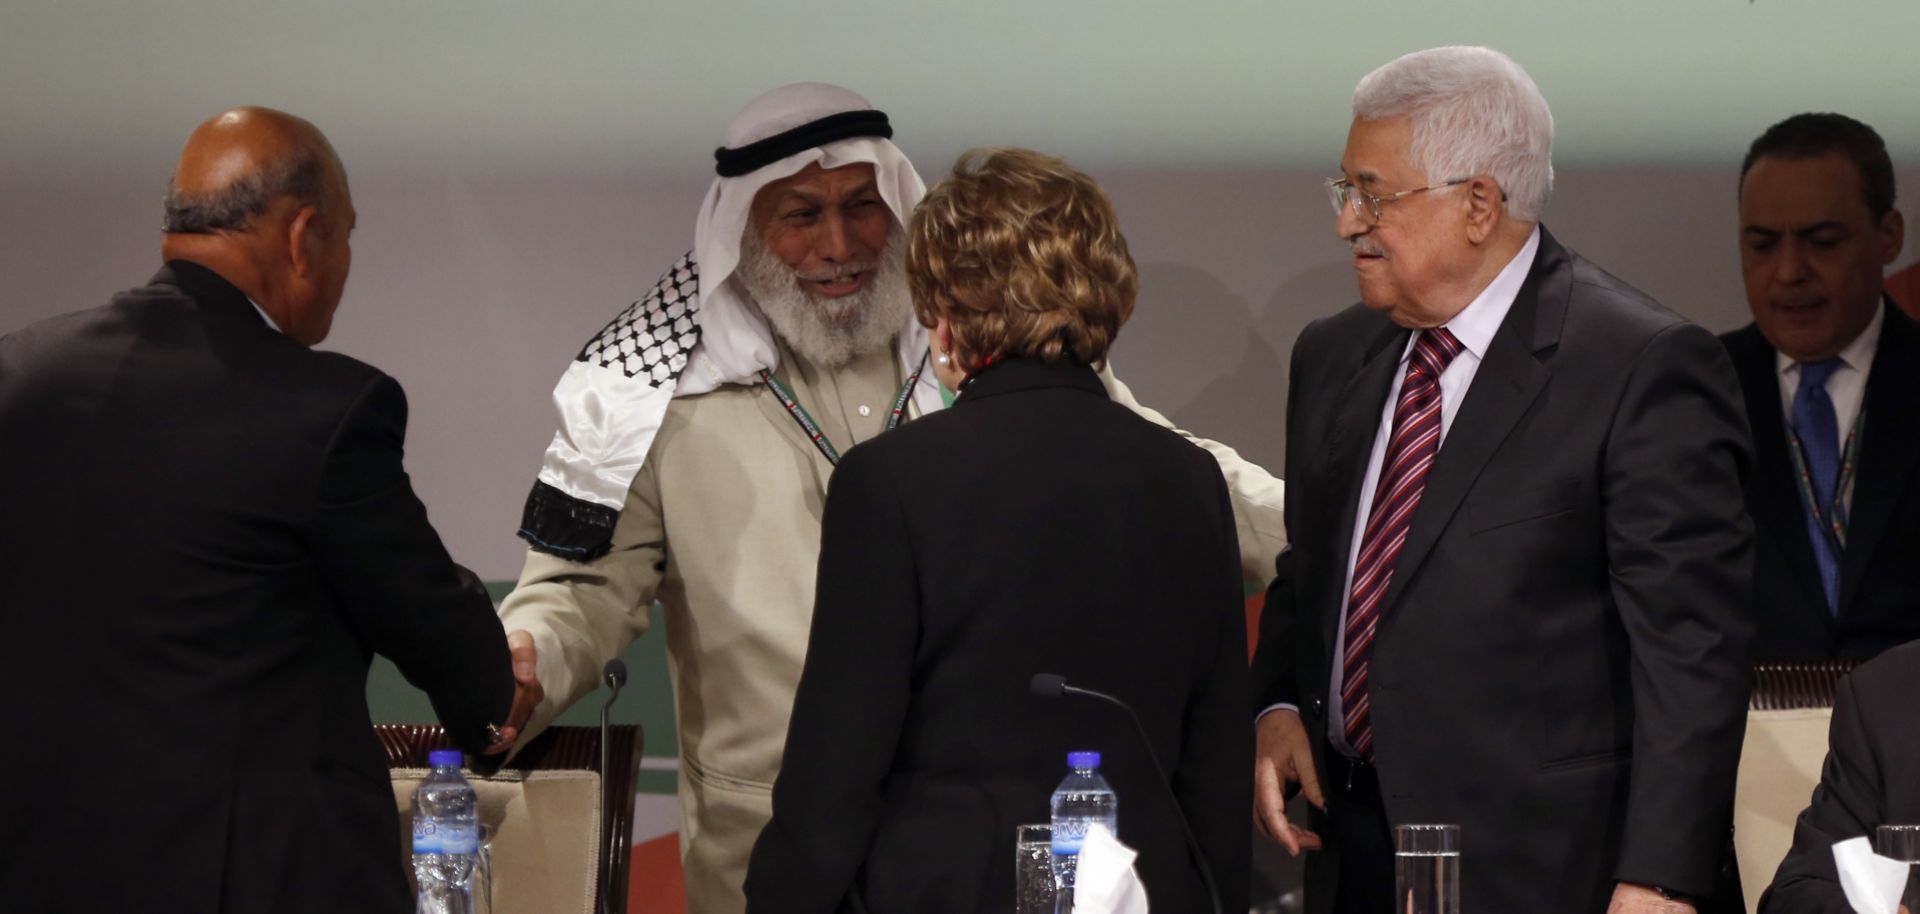 Palestinian President Mahmoud Abbas, right, greets Hamas official Ahmed Haj Ali, second from left, during the opening of the Seventh Fatah Congress in 2016 in the West Bank city of Ramallah.